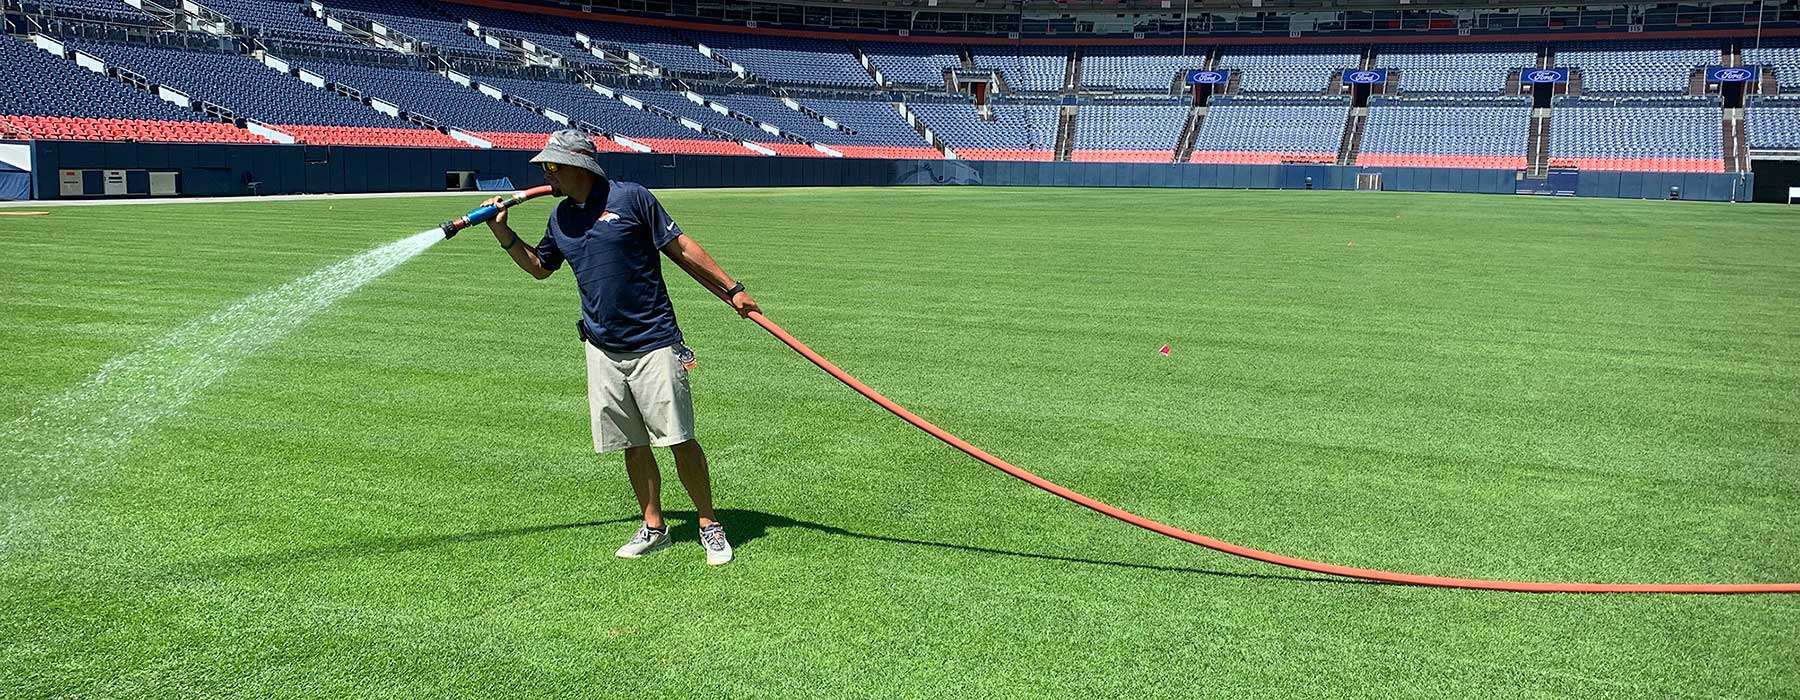 New sod get watered after being installed in a stadium in Denver, Colorado by Chris.